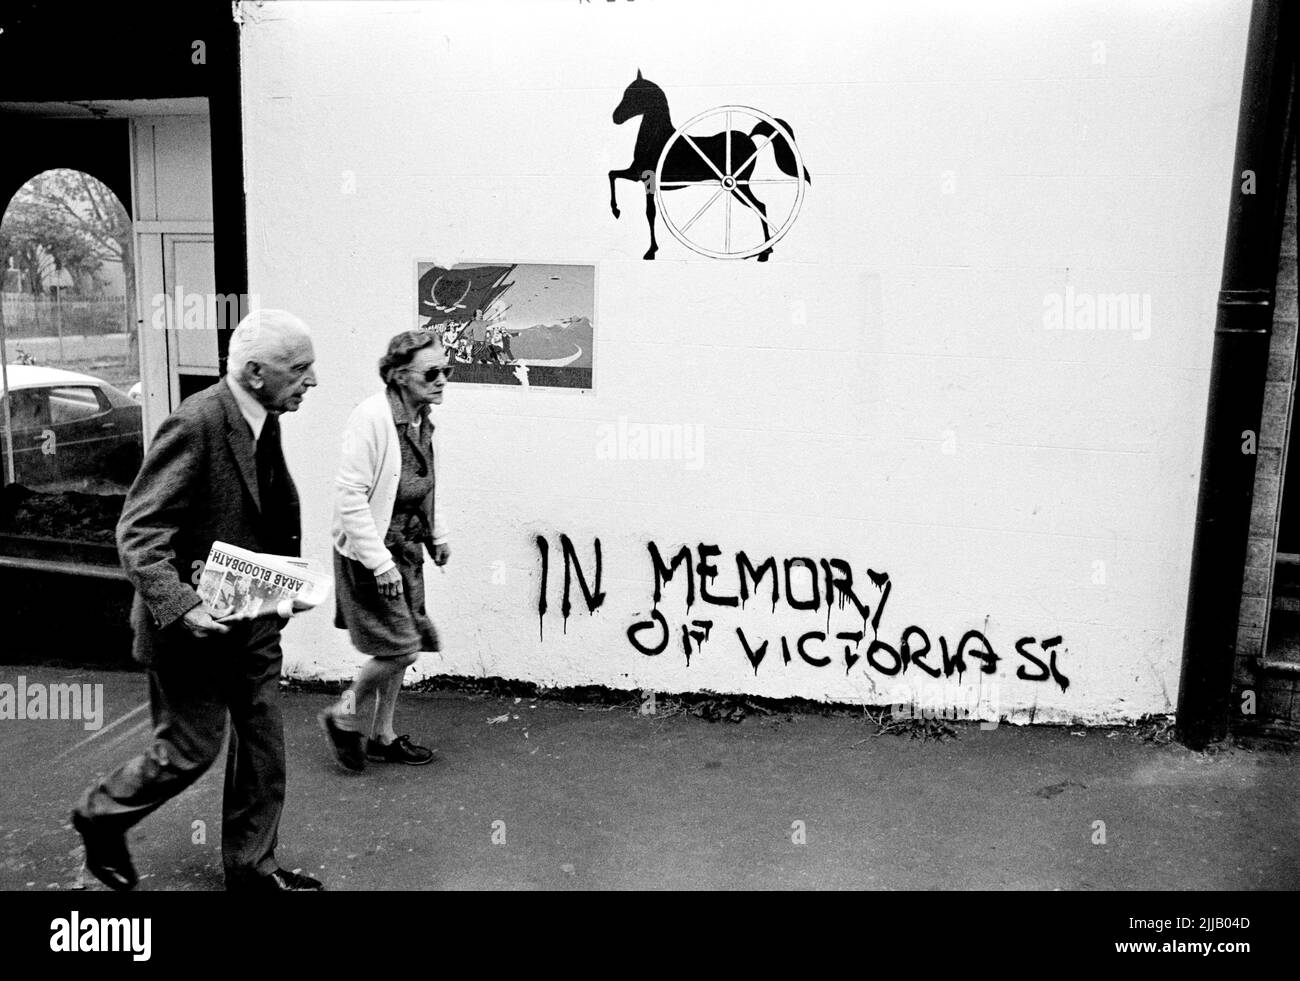 An elderly couple, residents of Sydney's Kings Cross walking in one of the side with activist green ban graffiti. Man carrying newspaper with headline, Arab Bloodbath. Vintage photo Stock Photo